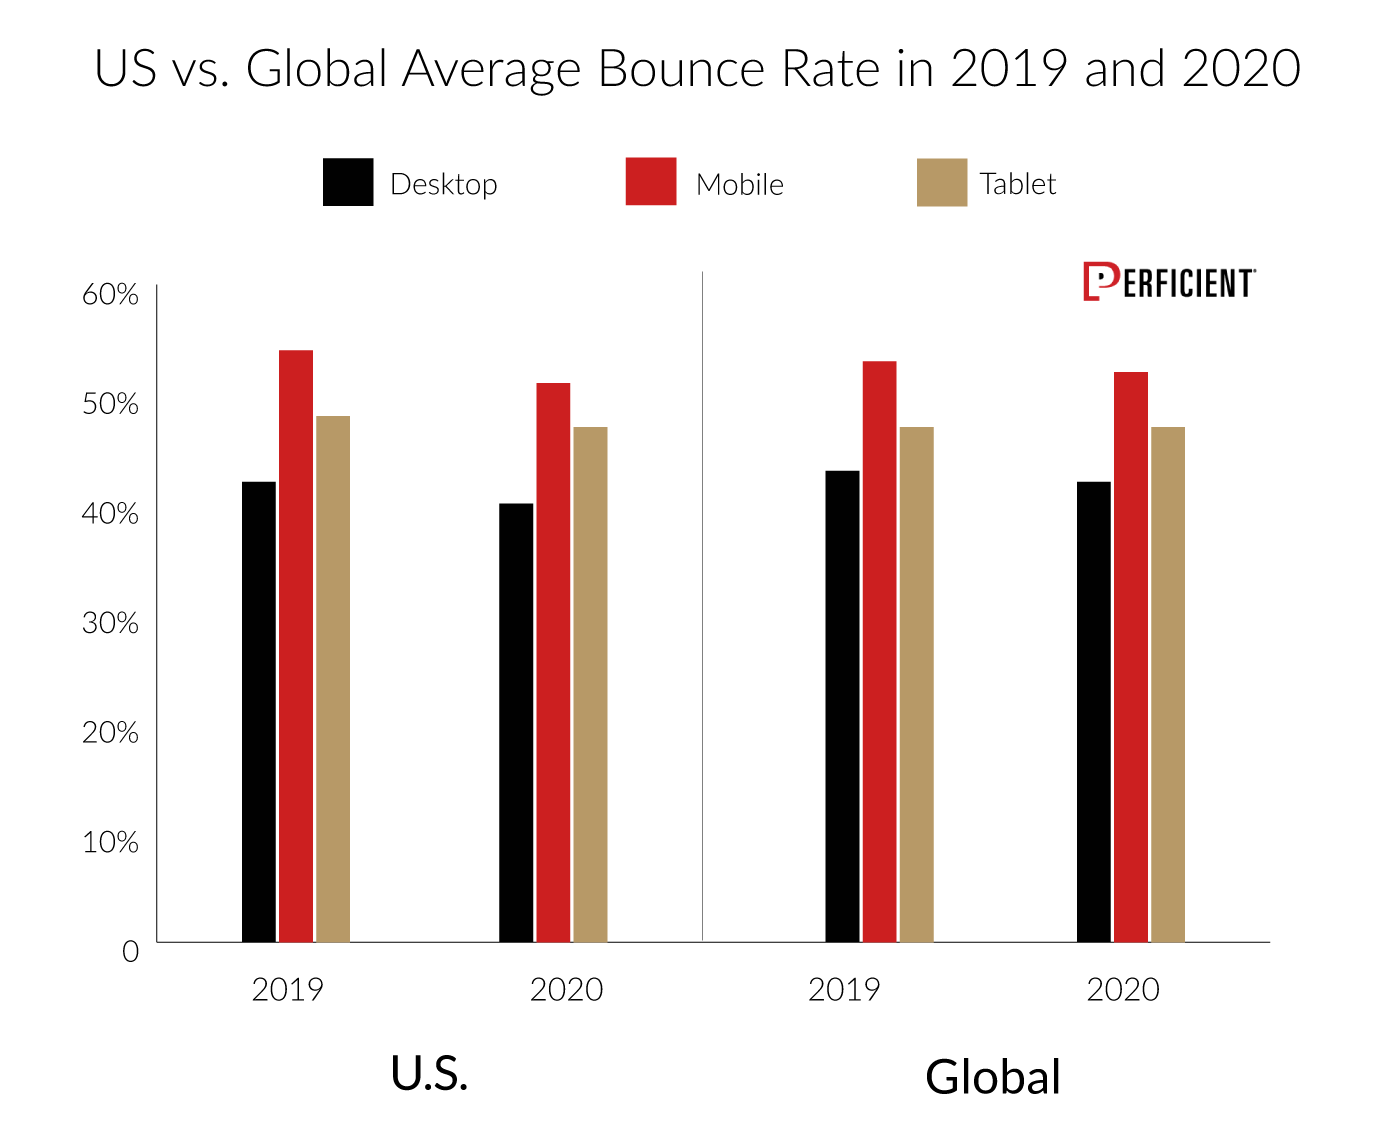 US and Global Average Bounce Rate for Desktop, Mobile, and Tablet in 2019 and 2020